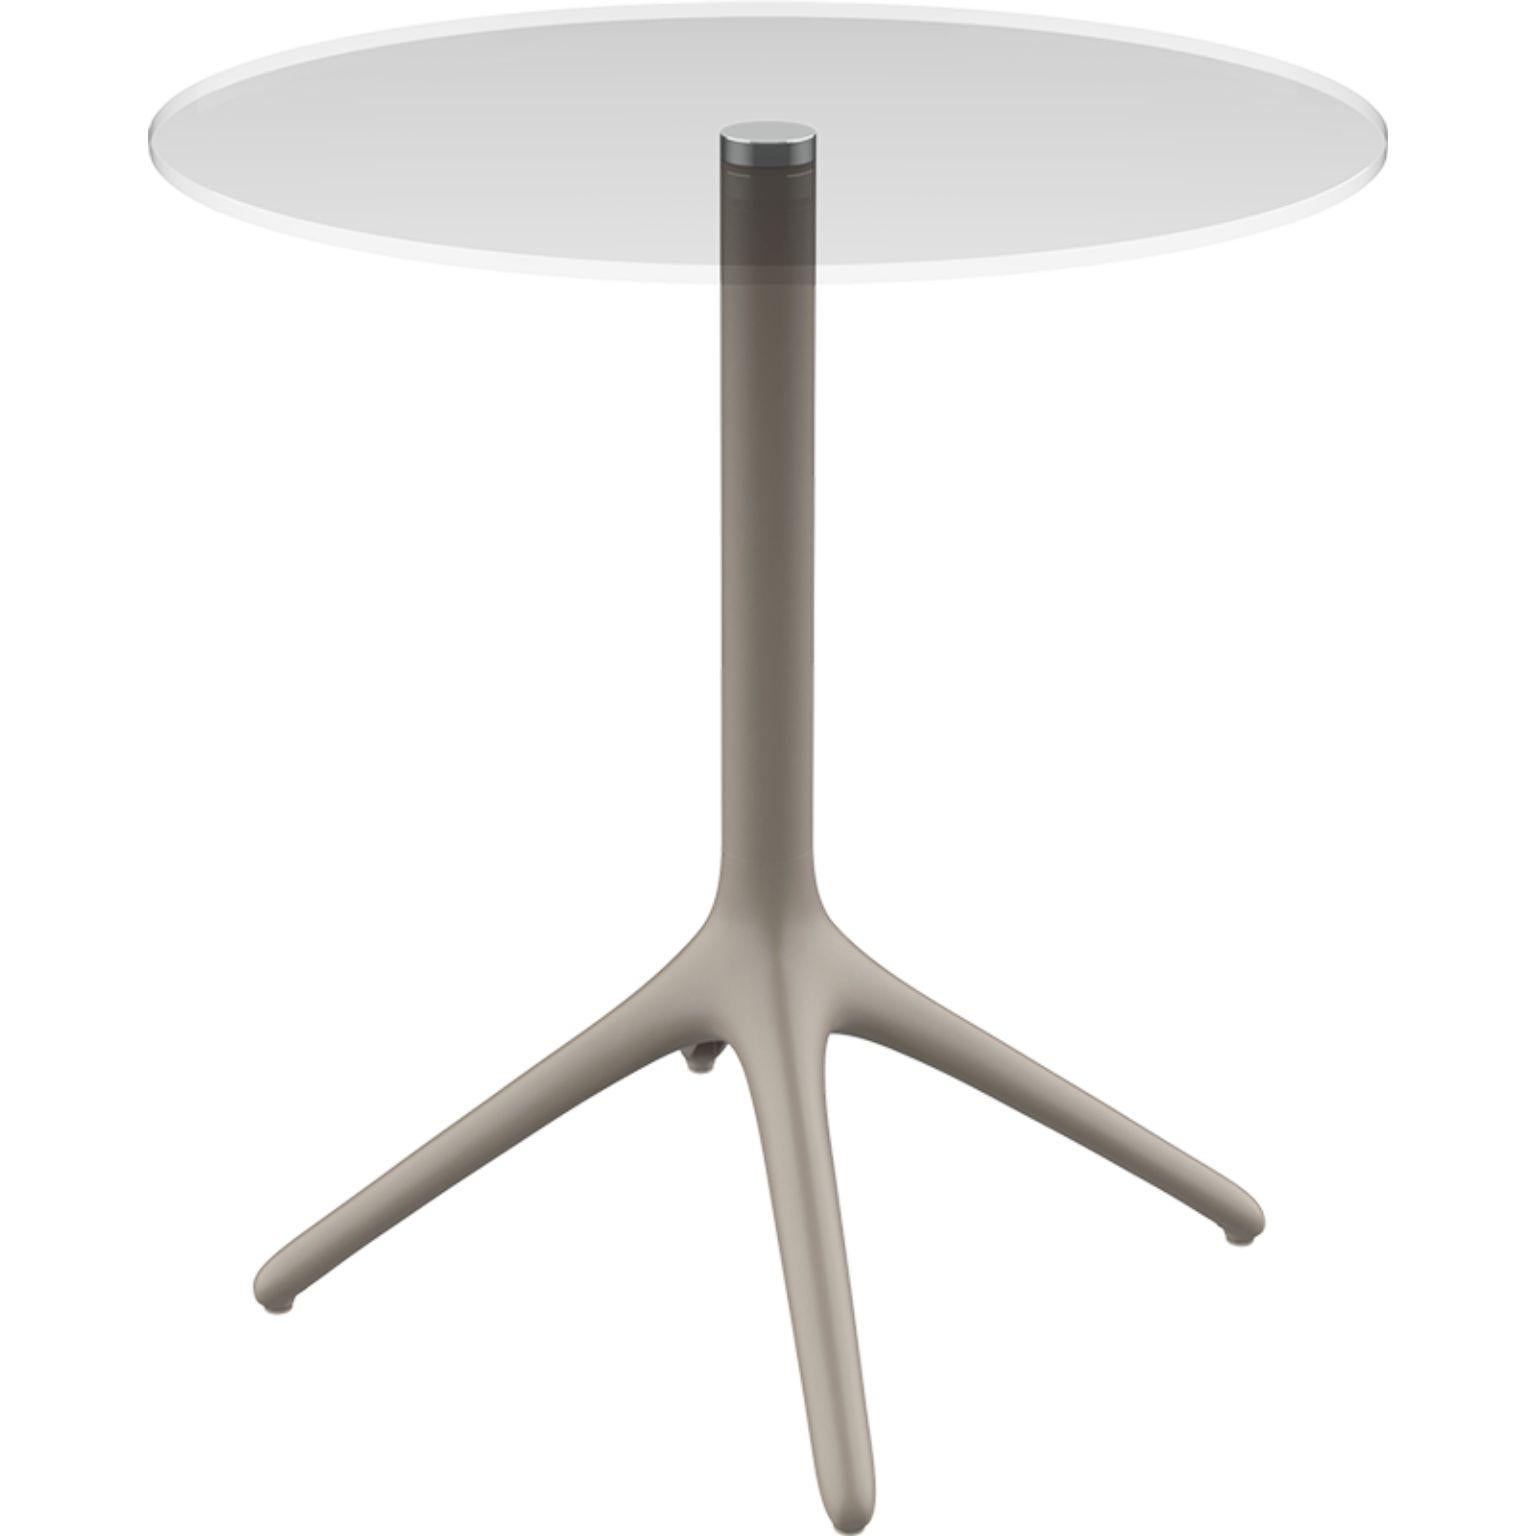 Uni cream table 73 by MOWEE
Dimensions: D 45.5 x H 73 cm
Material: Aluminium, tempered glass
Weight: 5.5 kg
Also available in different colours and finishes. Collapsable version available.

A table designed to be as versatile as possible and